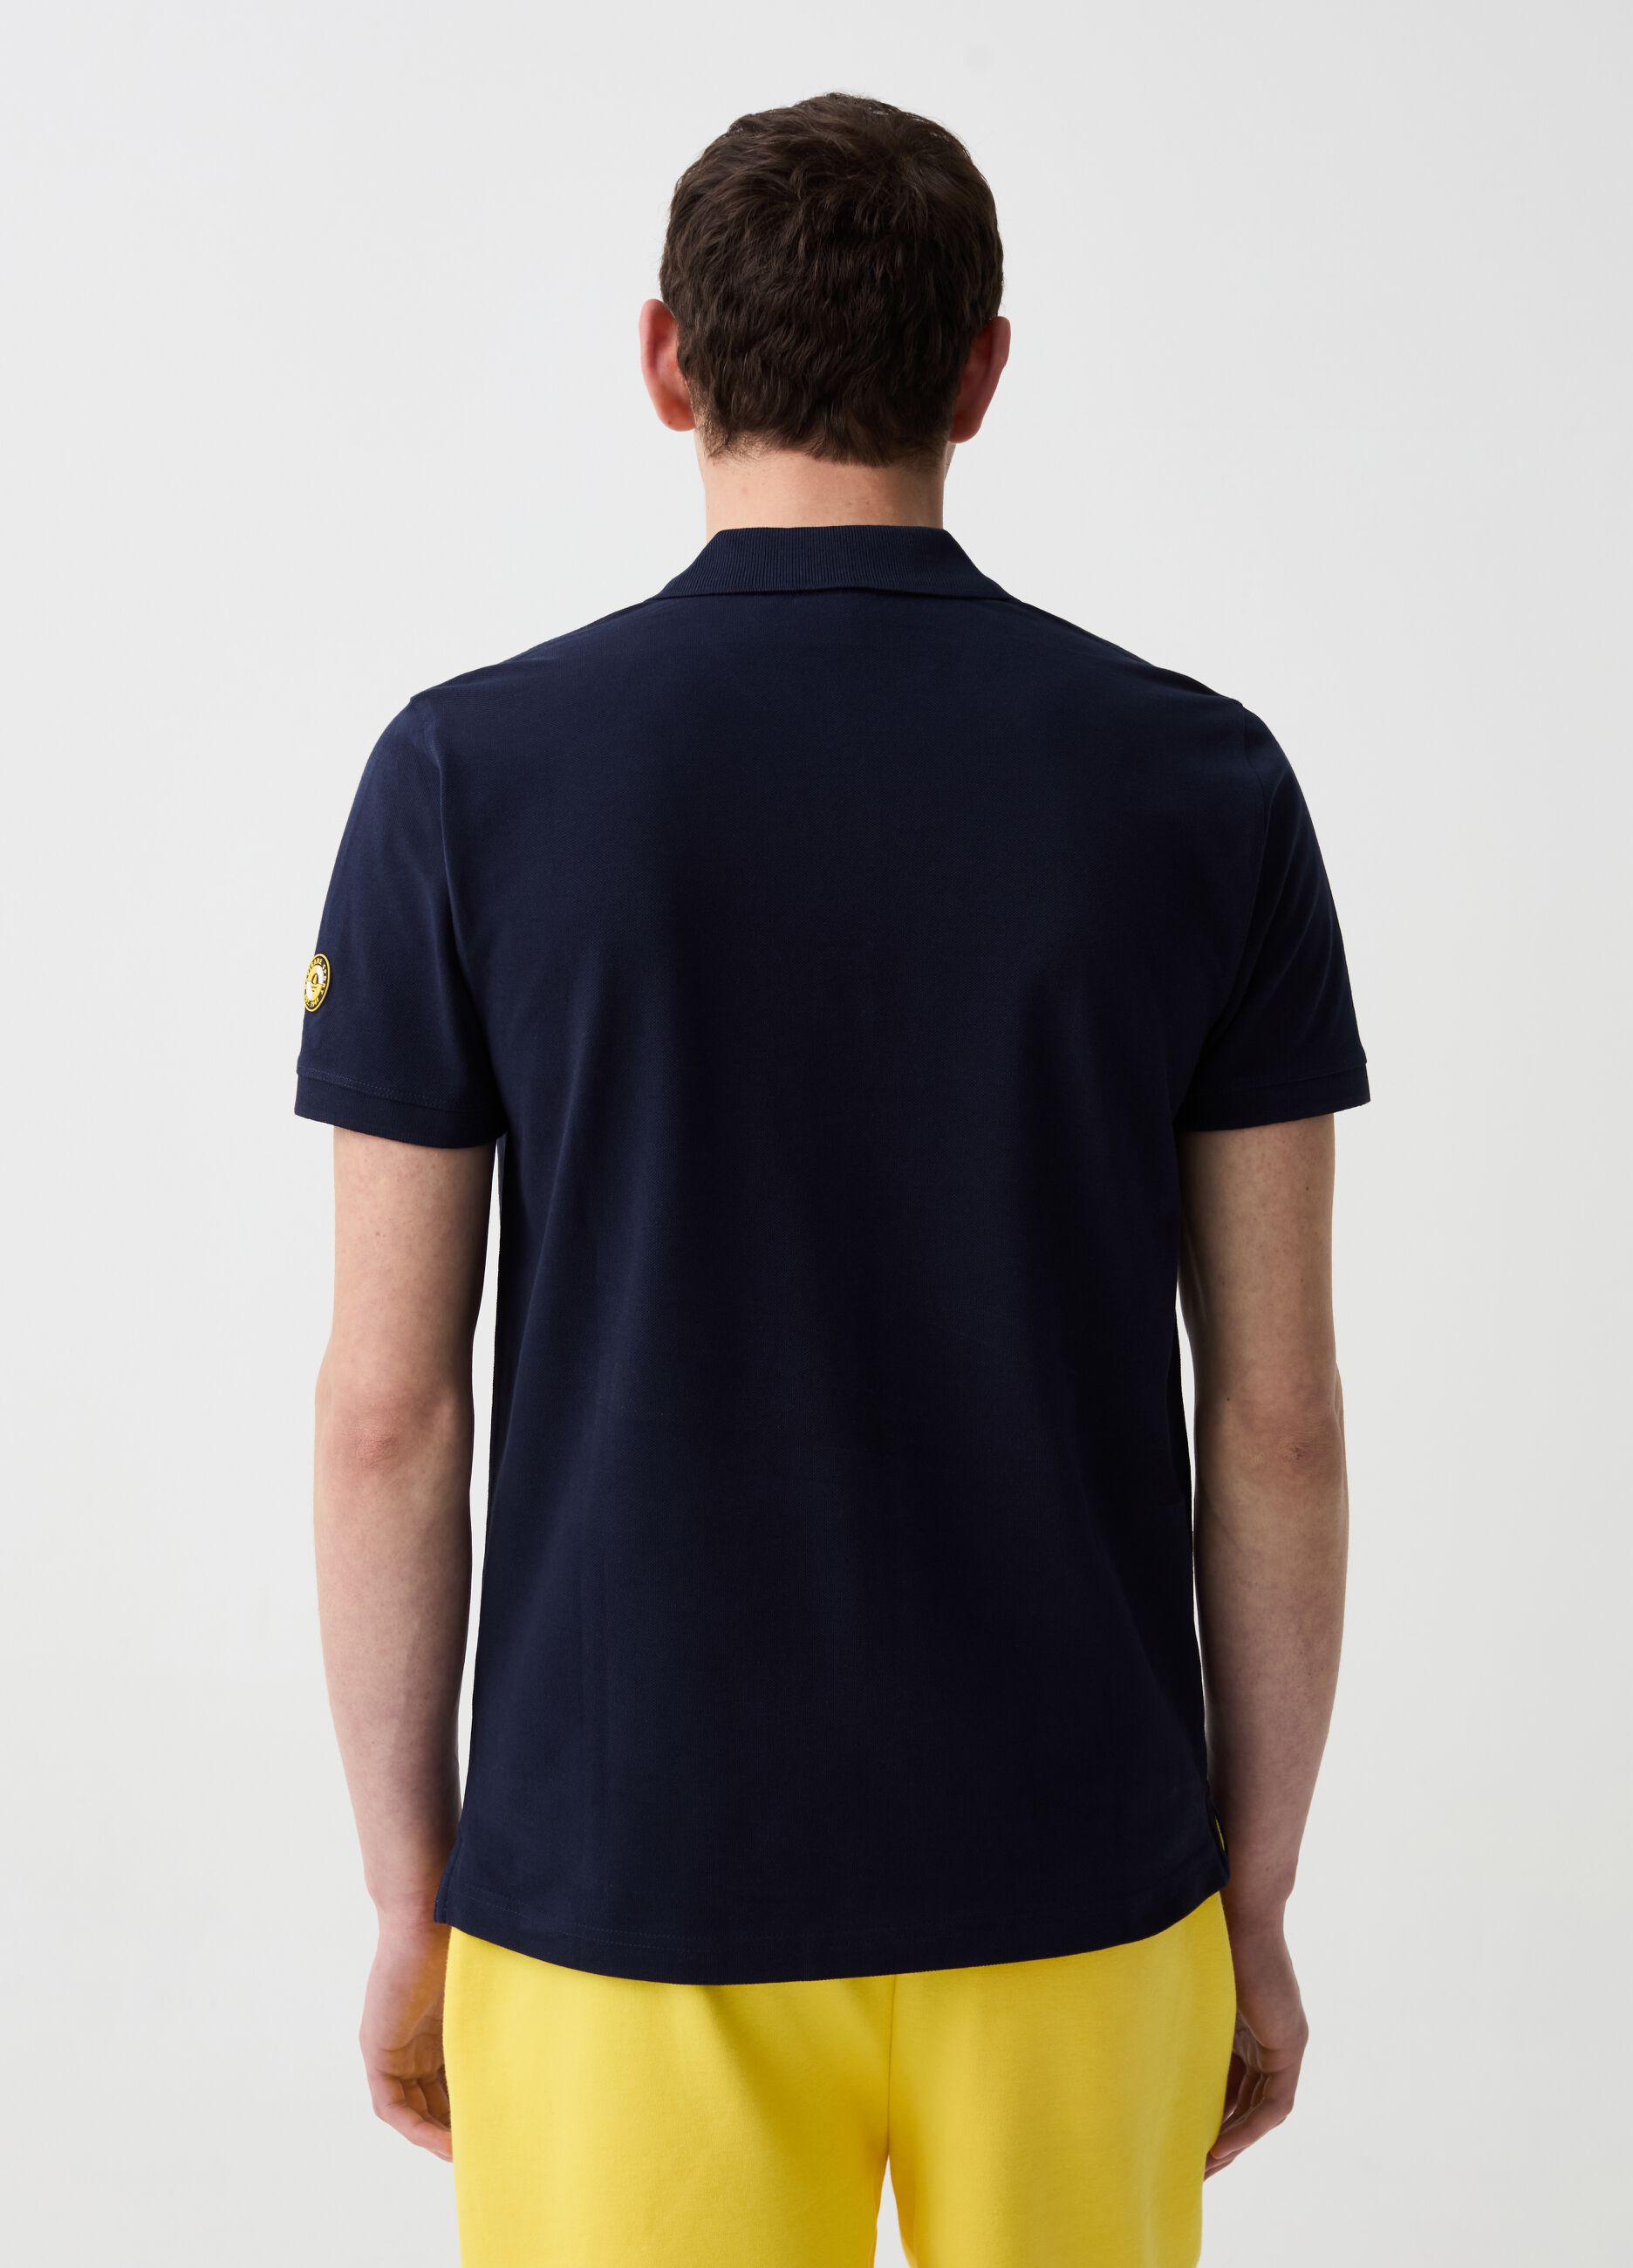 Navigare Sport polo shirt with detail and stripes